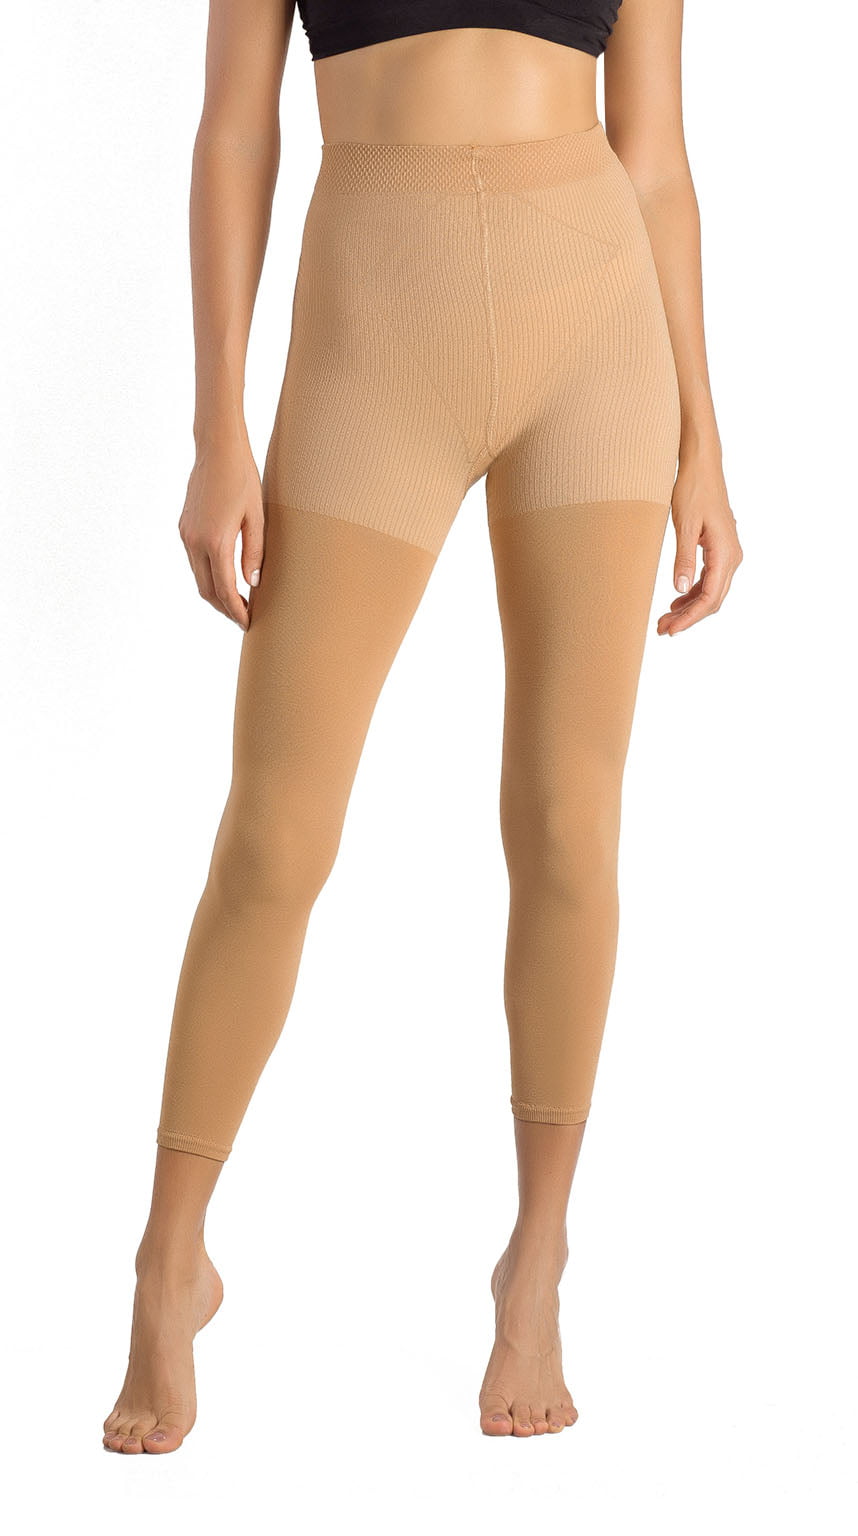 Nude Support TIGHTS size Medium 